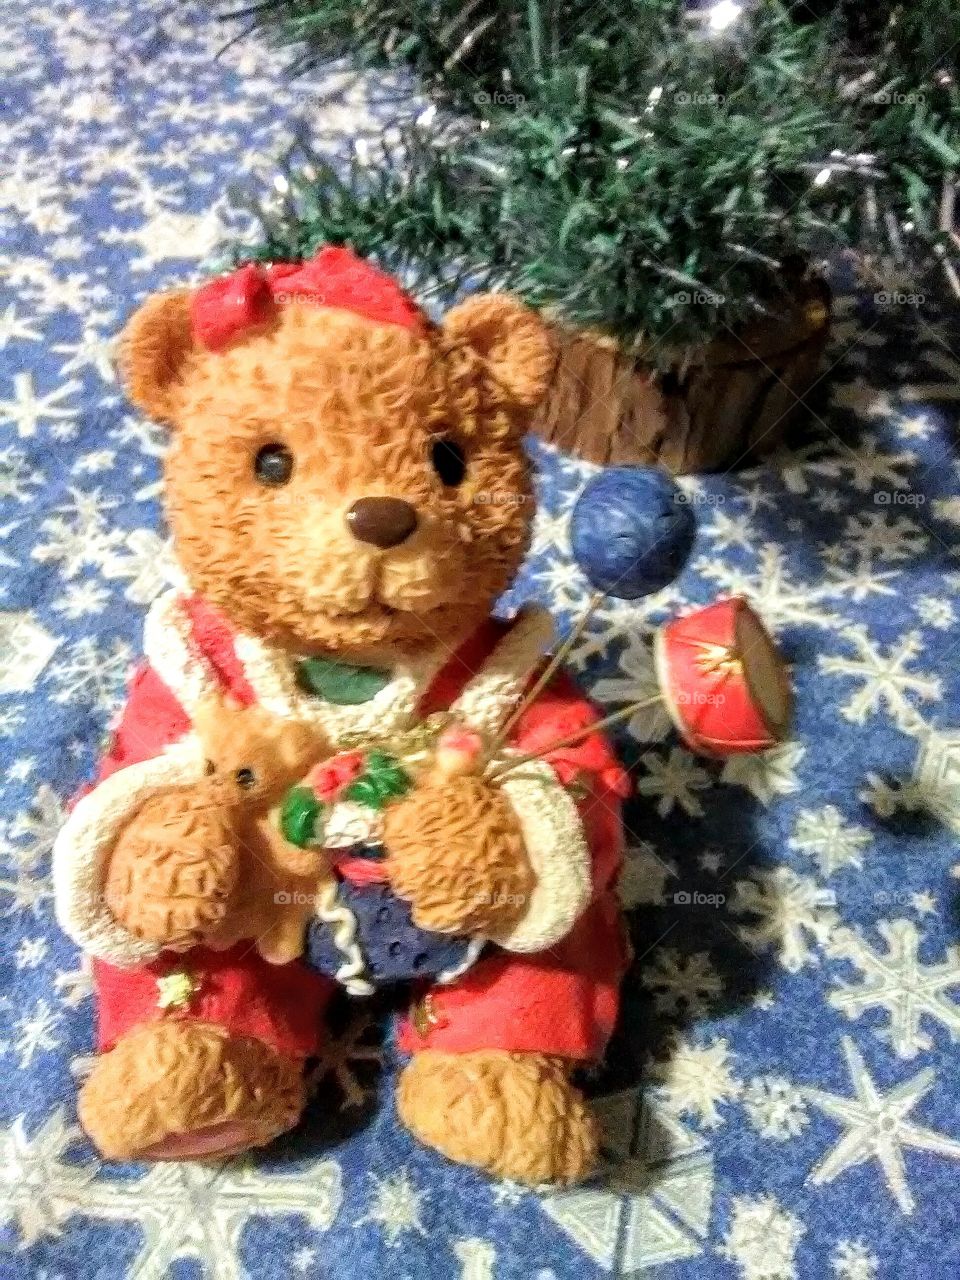 Christmas Bear
please help me and buy one of my pictures to pay for my sister medicine